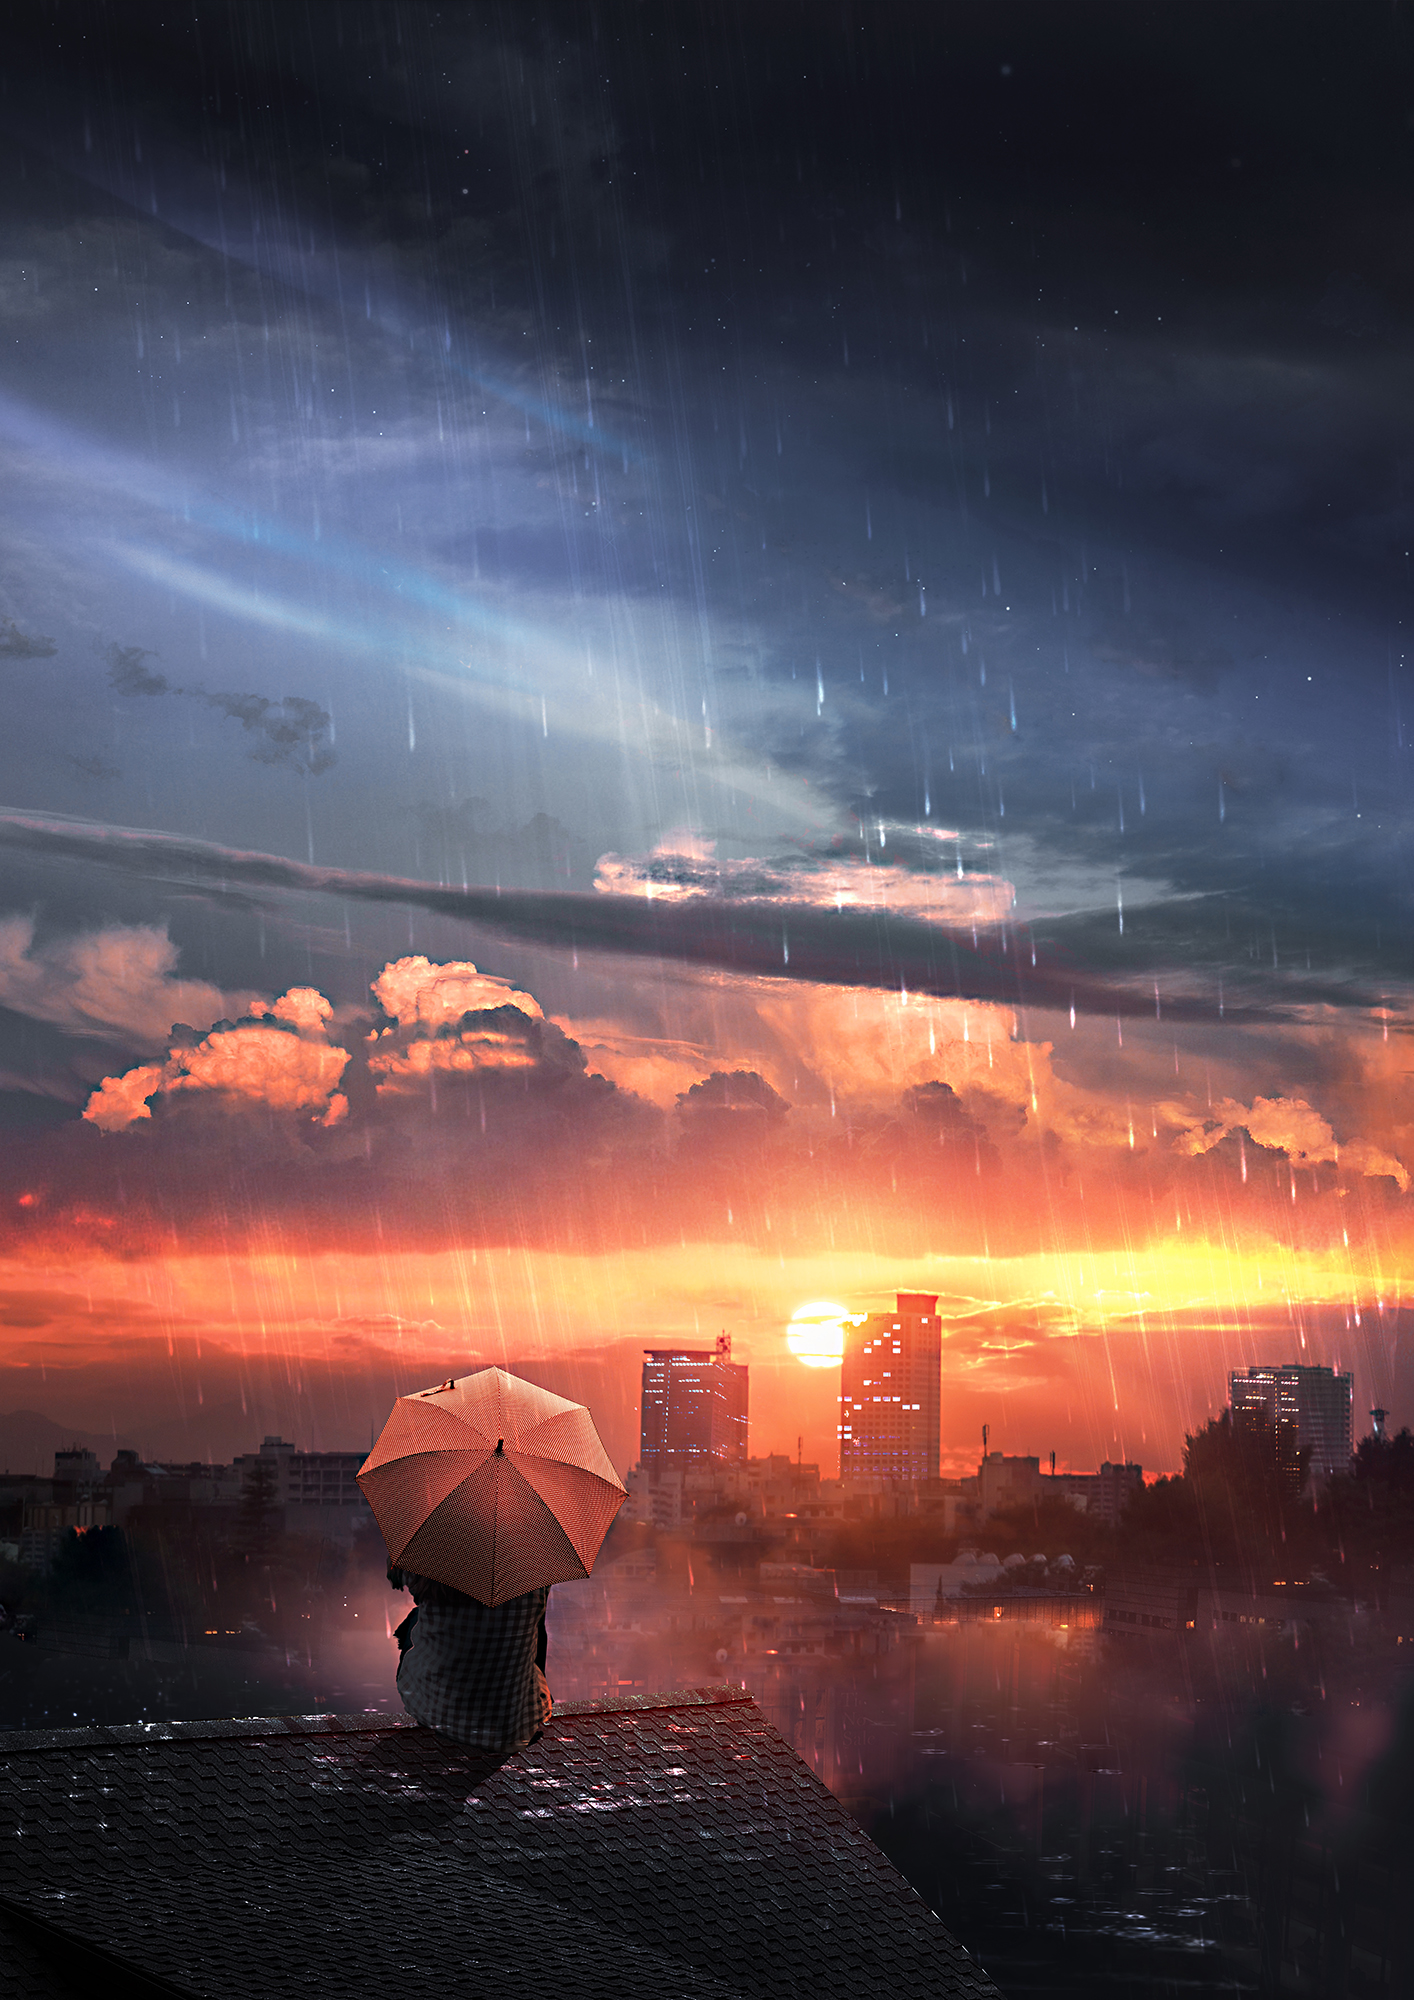 rain, art, loneliness, privacy, night, roof, seclusion, sky, umbrella cell phone wallpapers